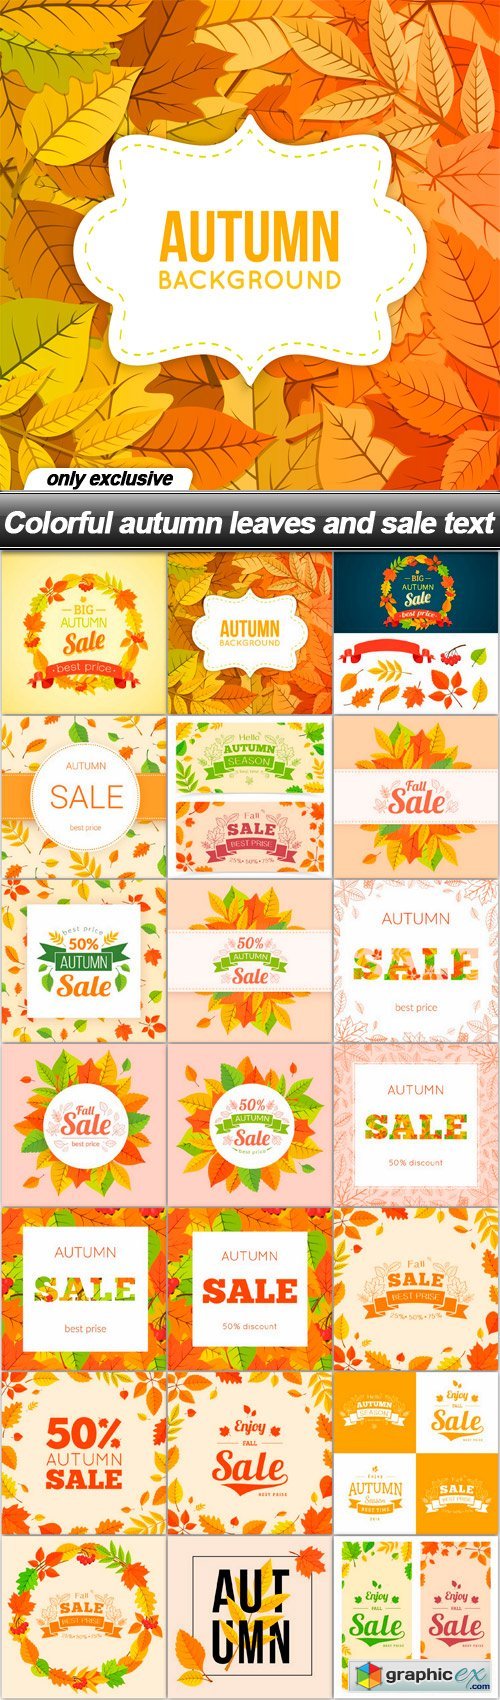 Colorful autumn leaves and sale text - 21 EPS